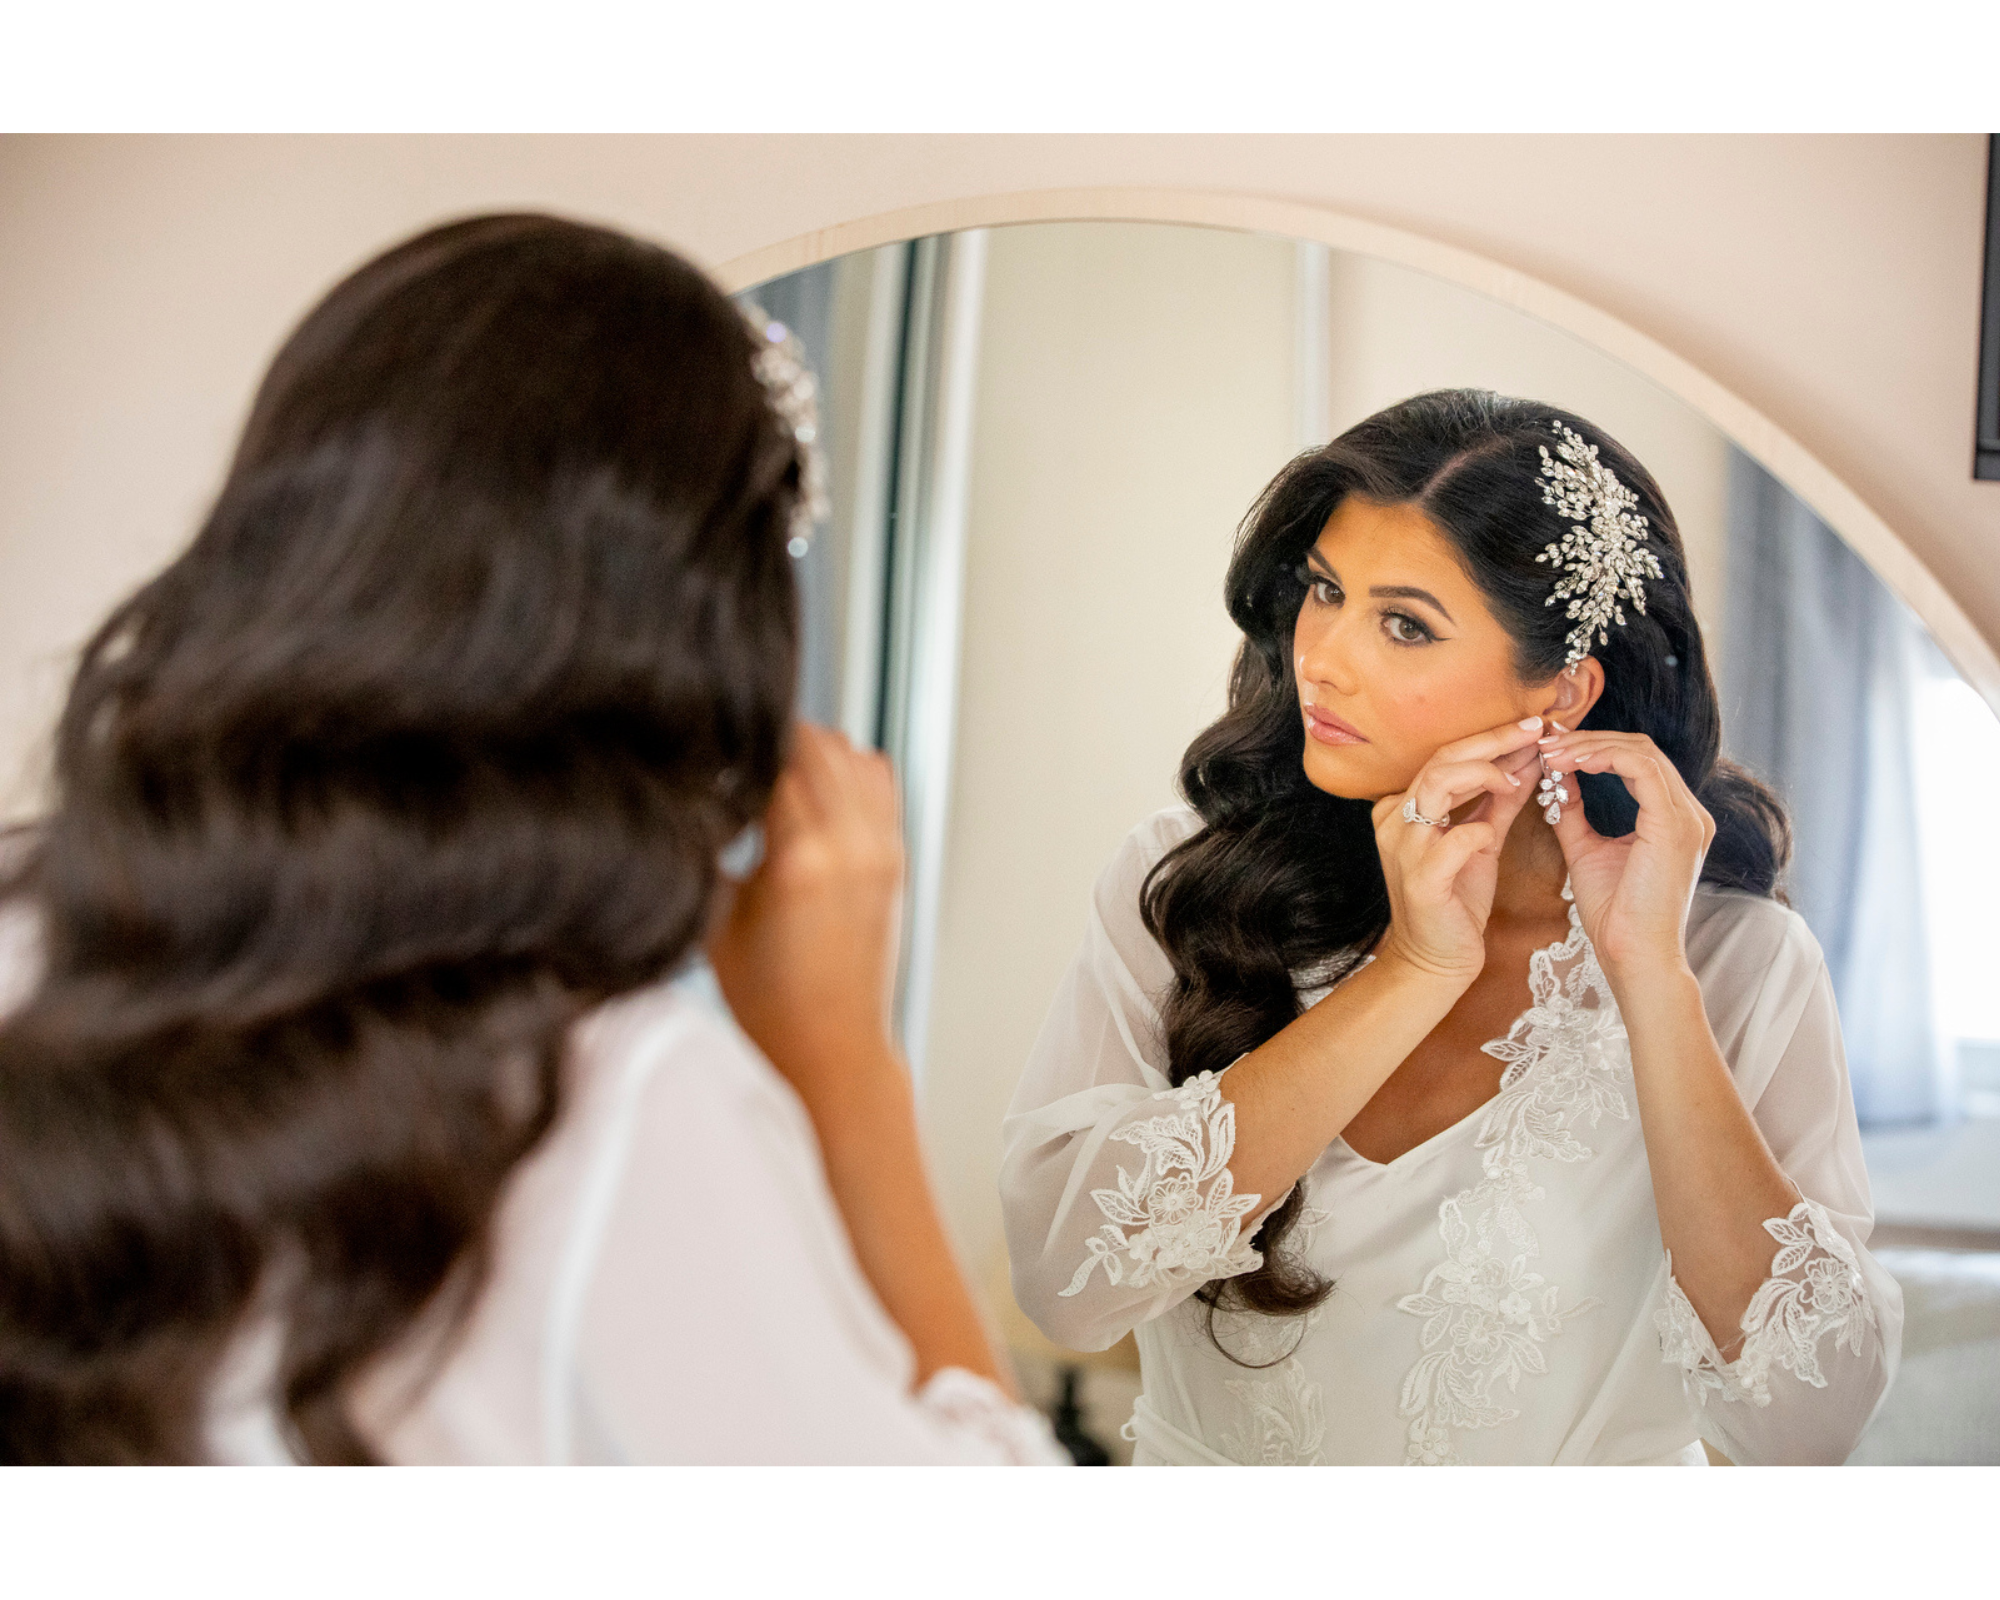 Noelle getting ready on her big day. She's wearing a Swarovski crystal bridal comb and jewelry, and a beautiful bridal robe.